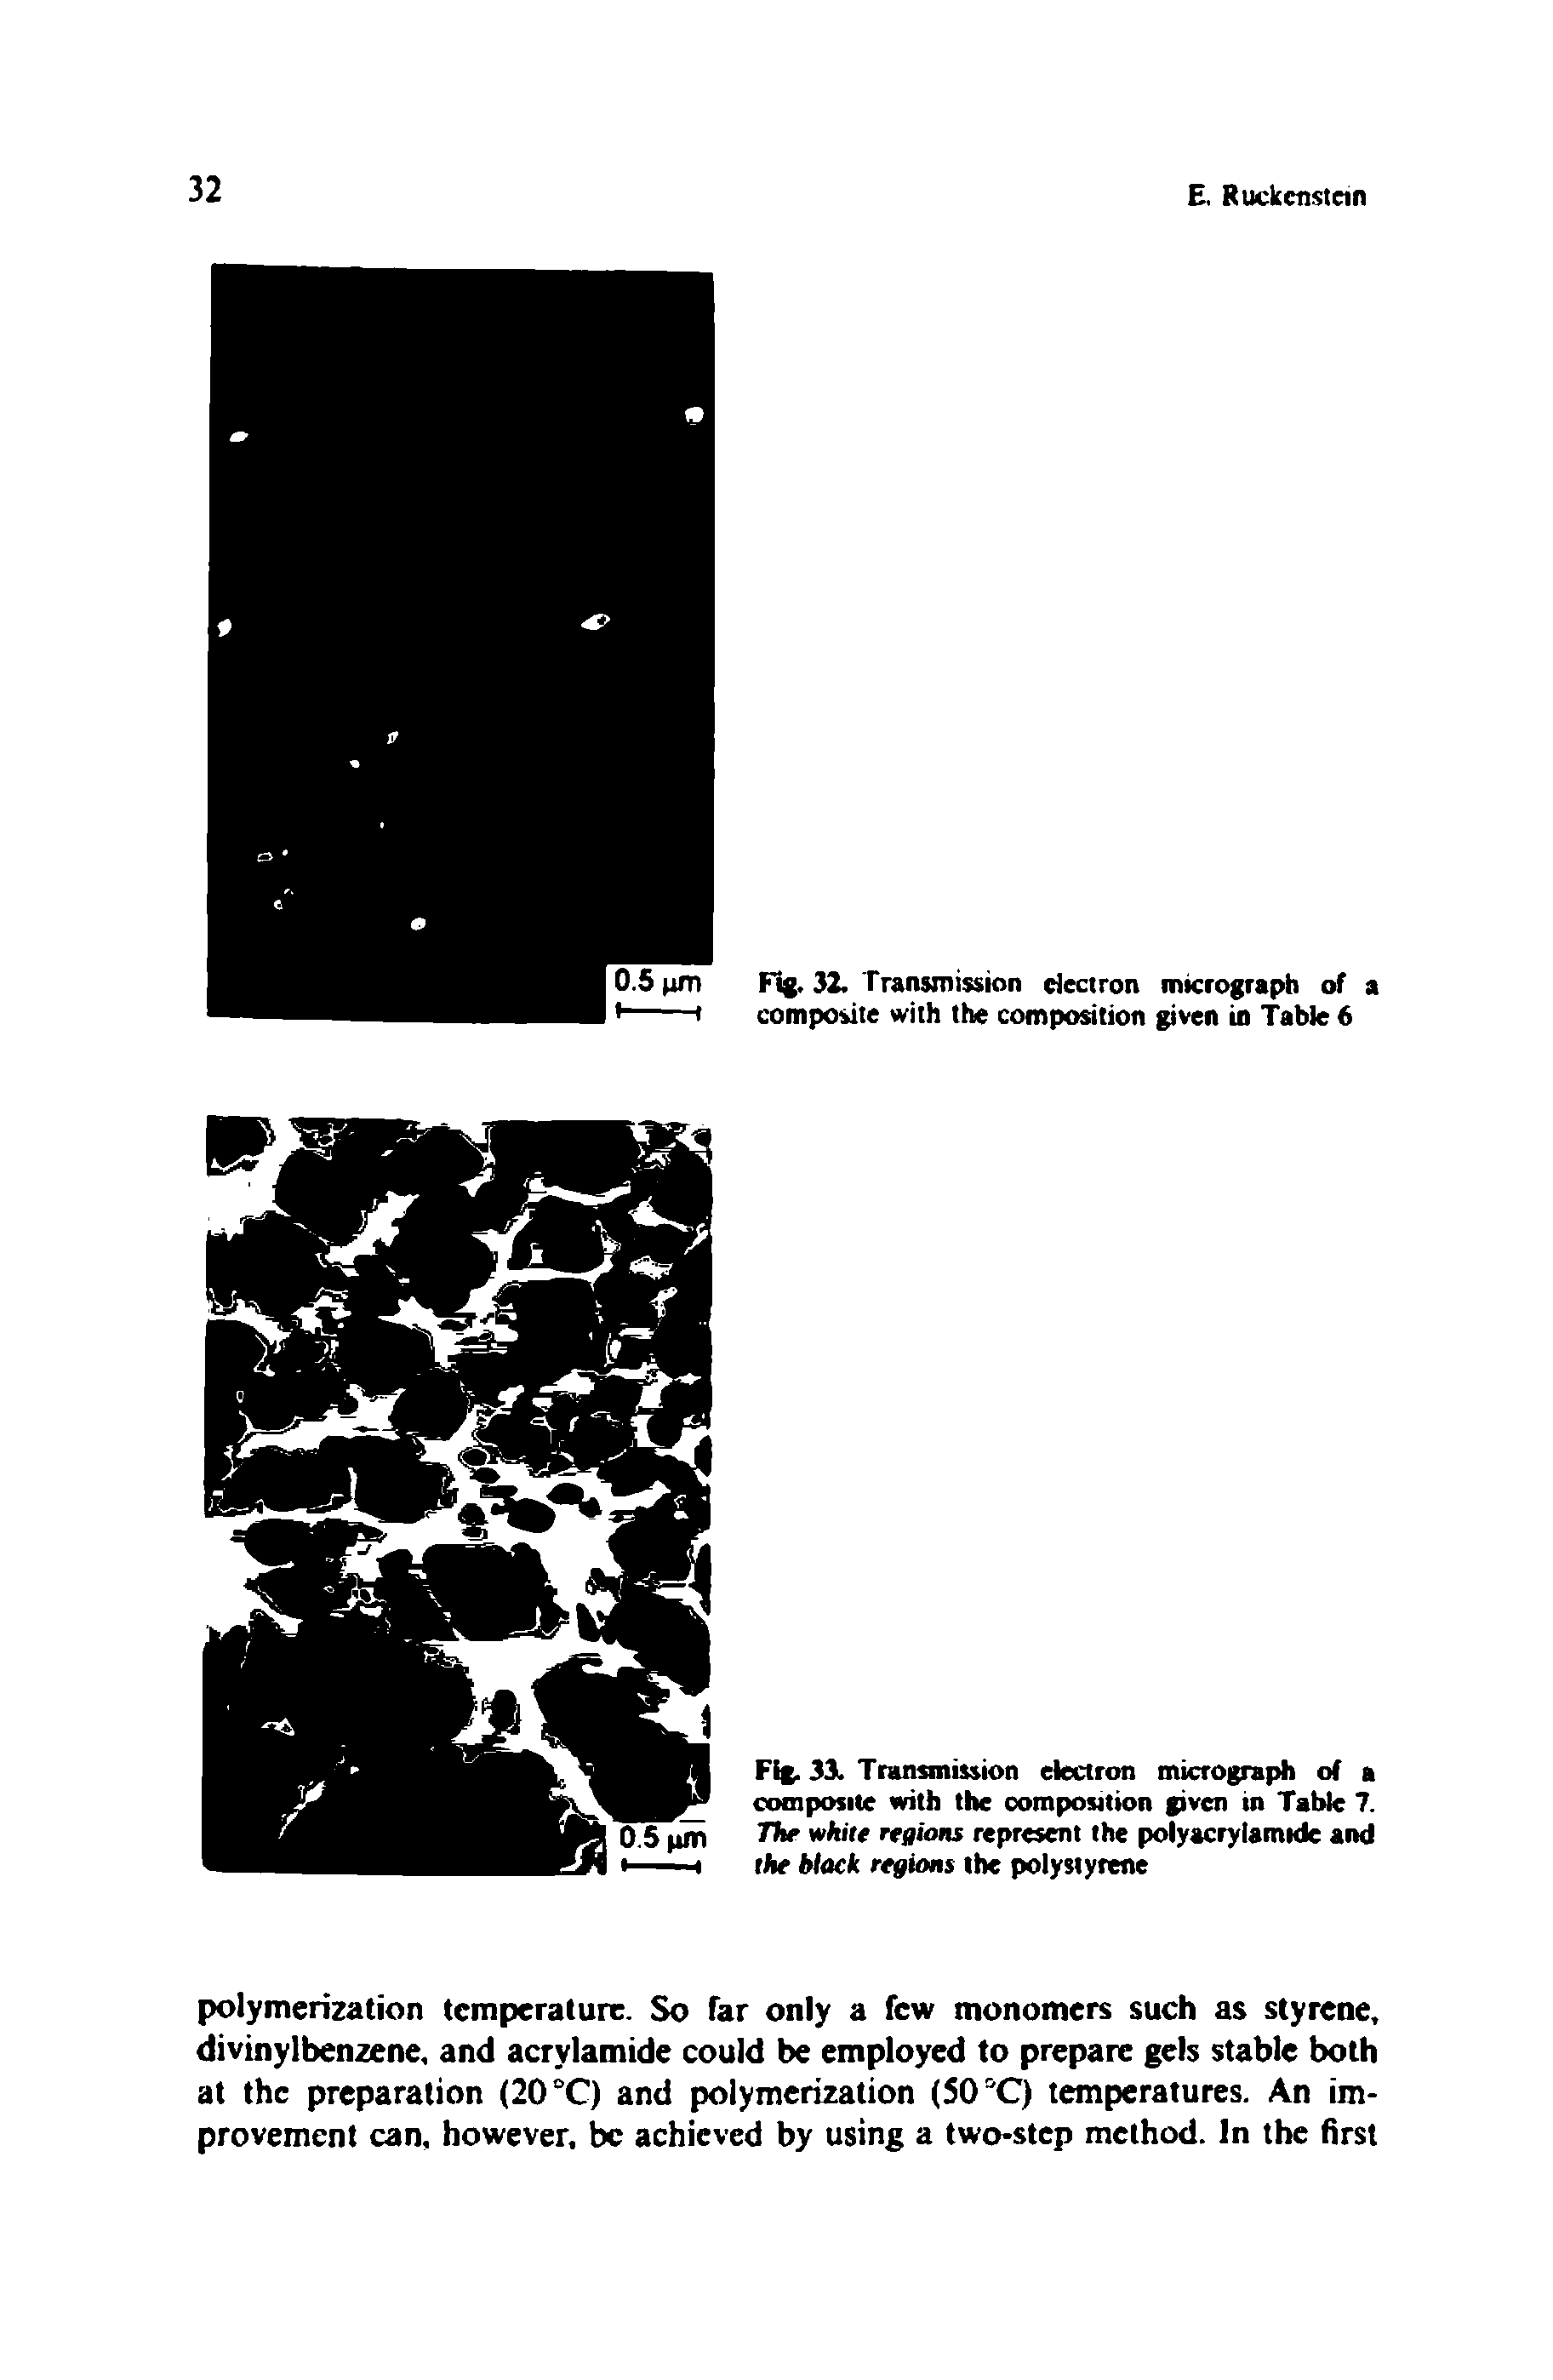 Fig. 33. Transmission electron micrograph of a composite with the composition given in Table 7. The white regions represent the polyacrylamide and the black regions the polystyrene...